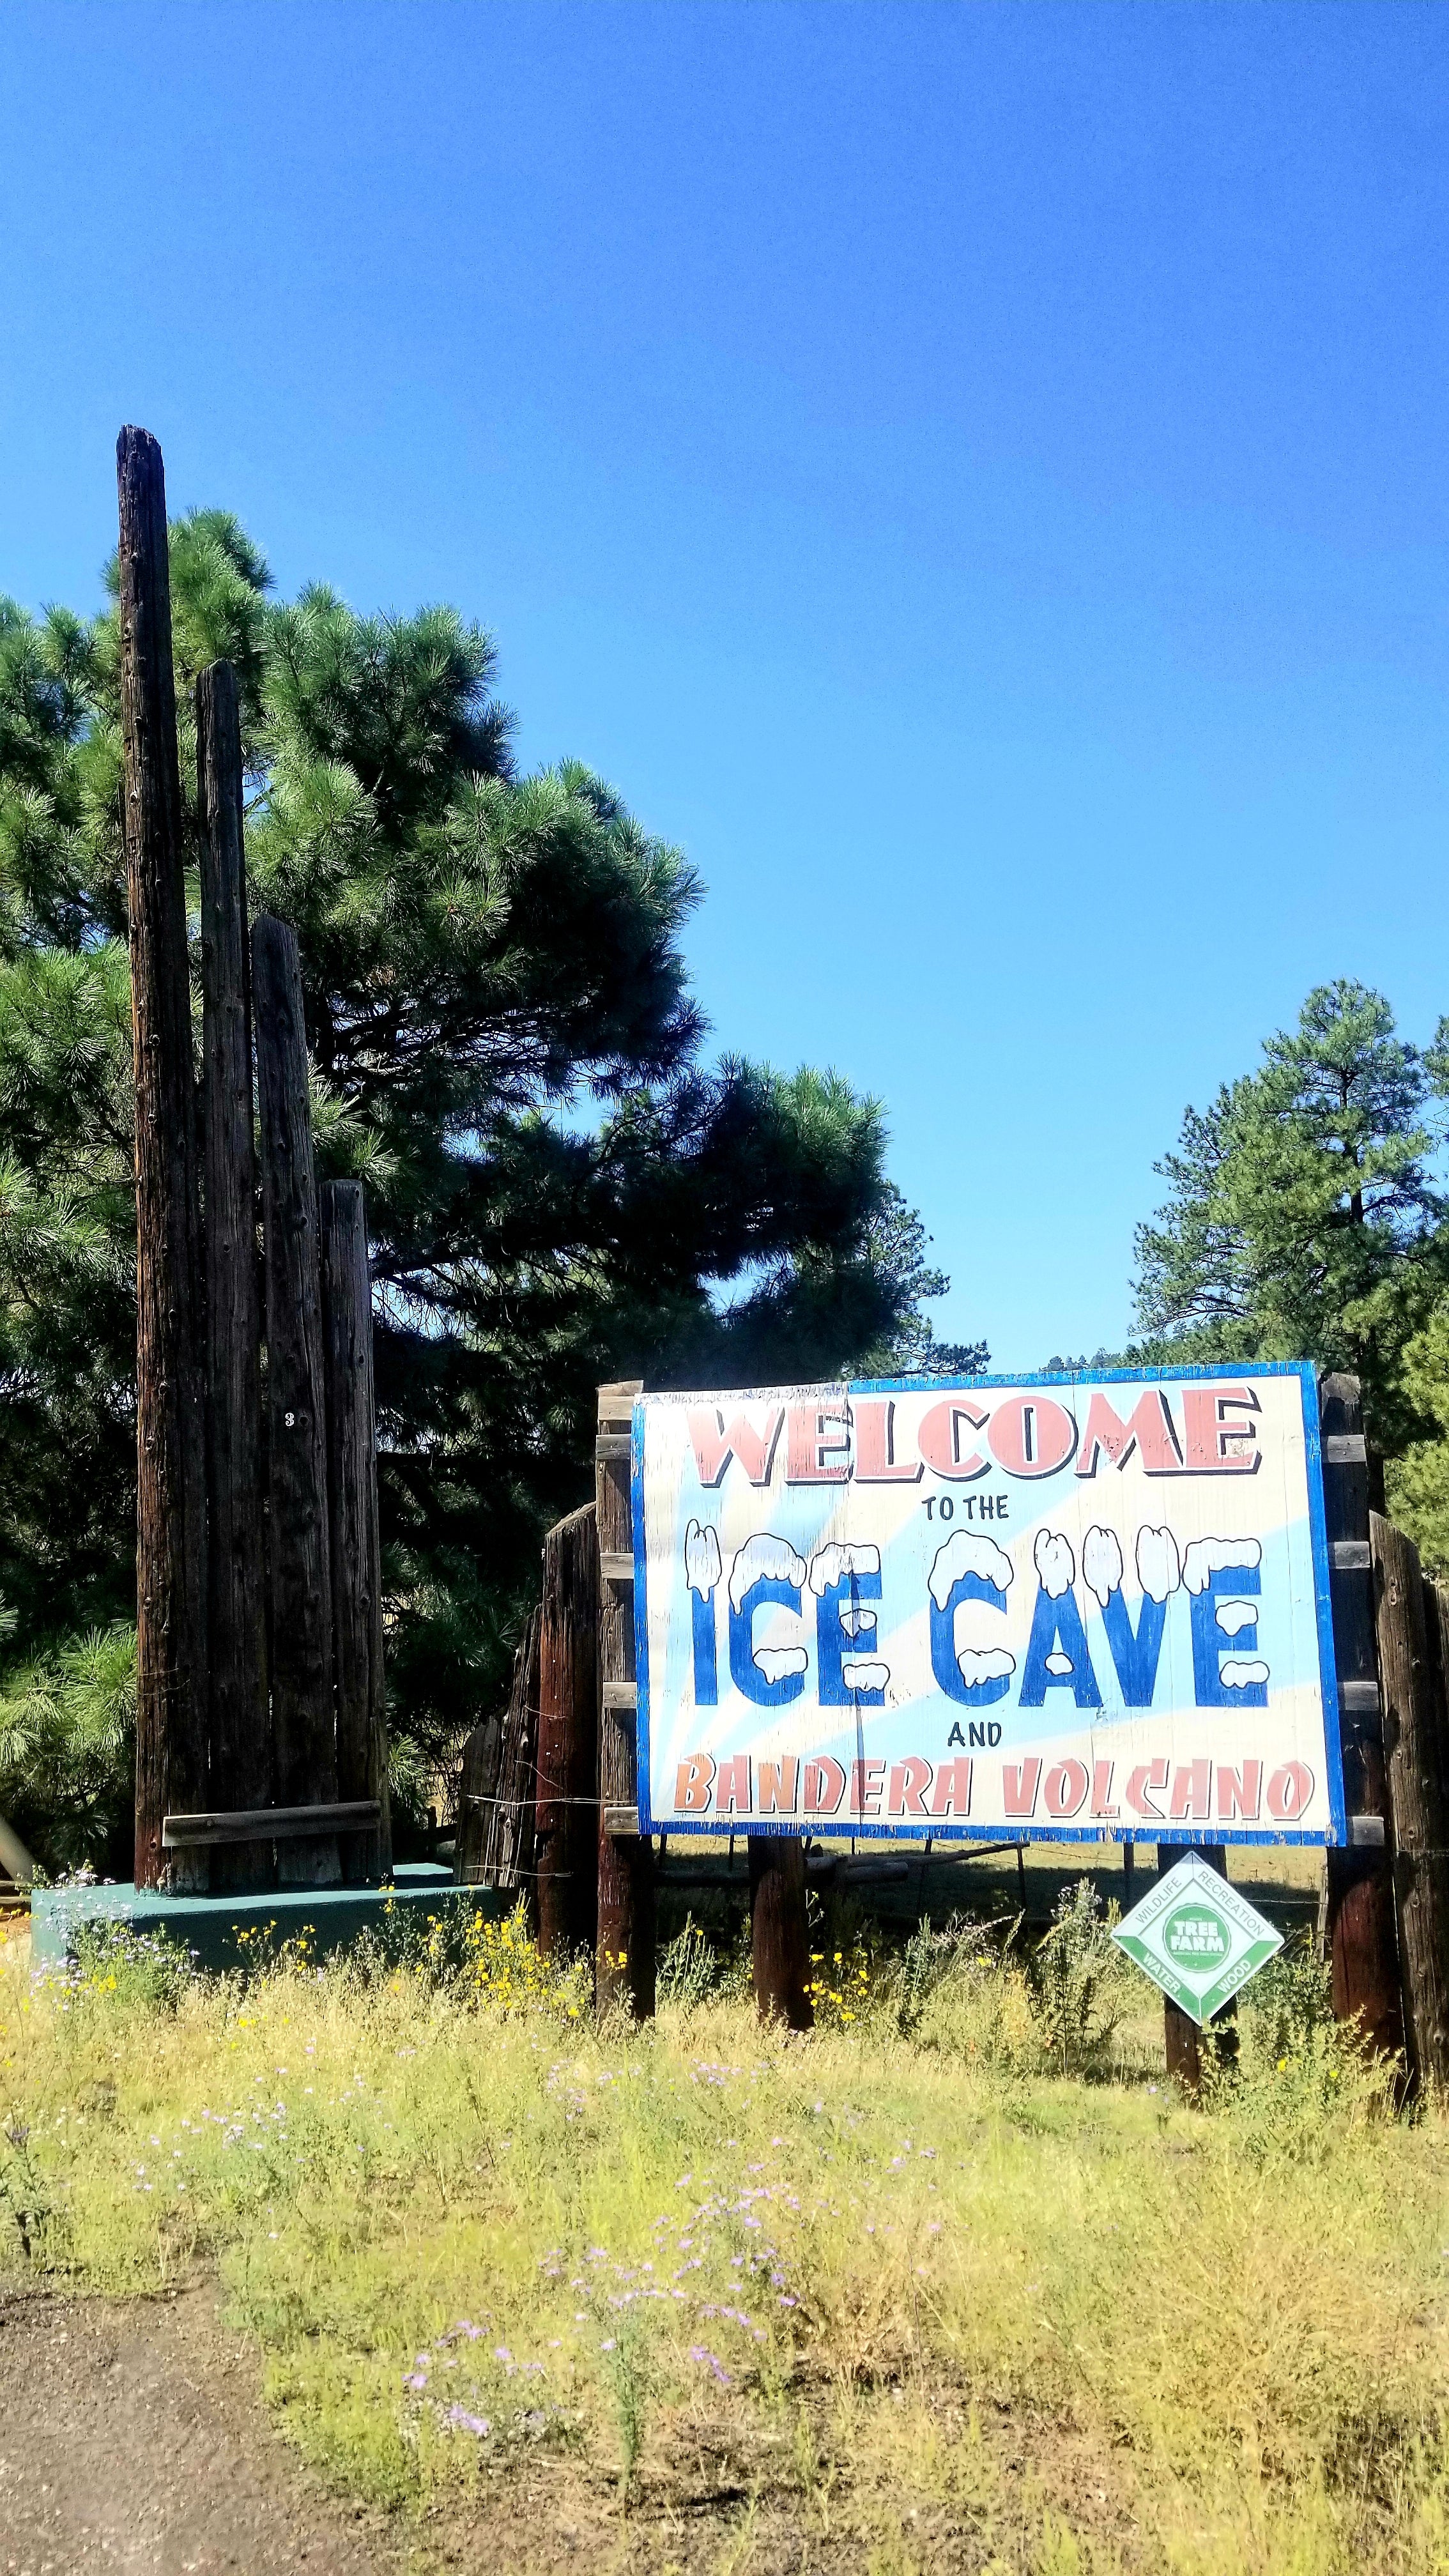 Camper submitted image from Ice Cave & Bandera Volcano - 5